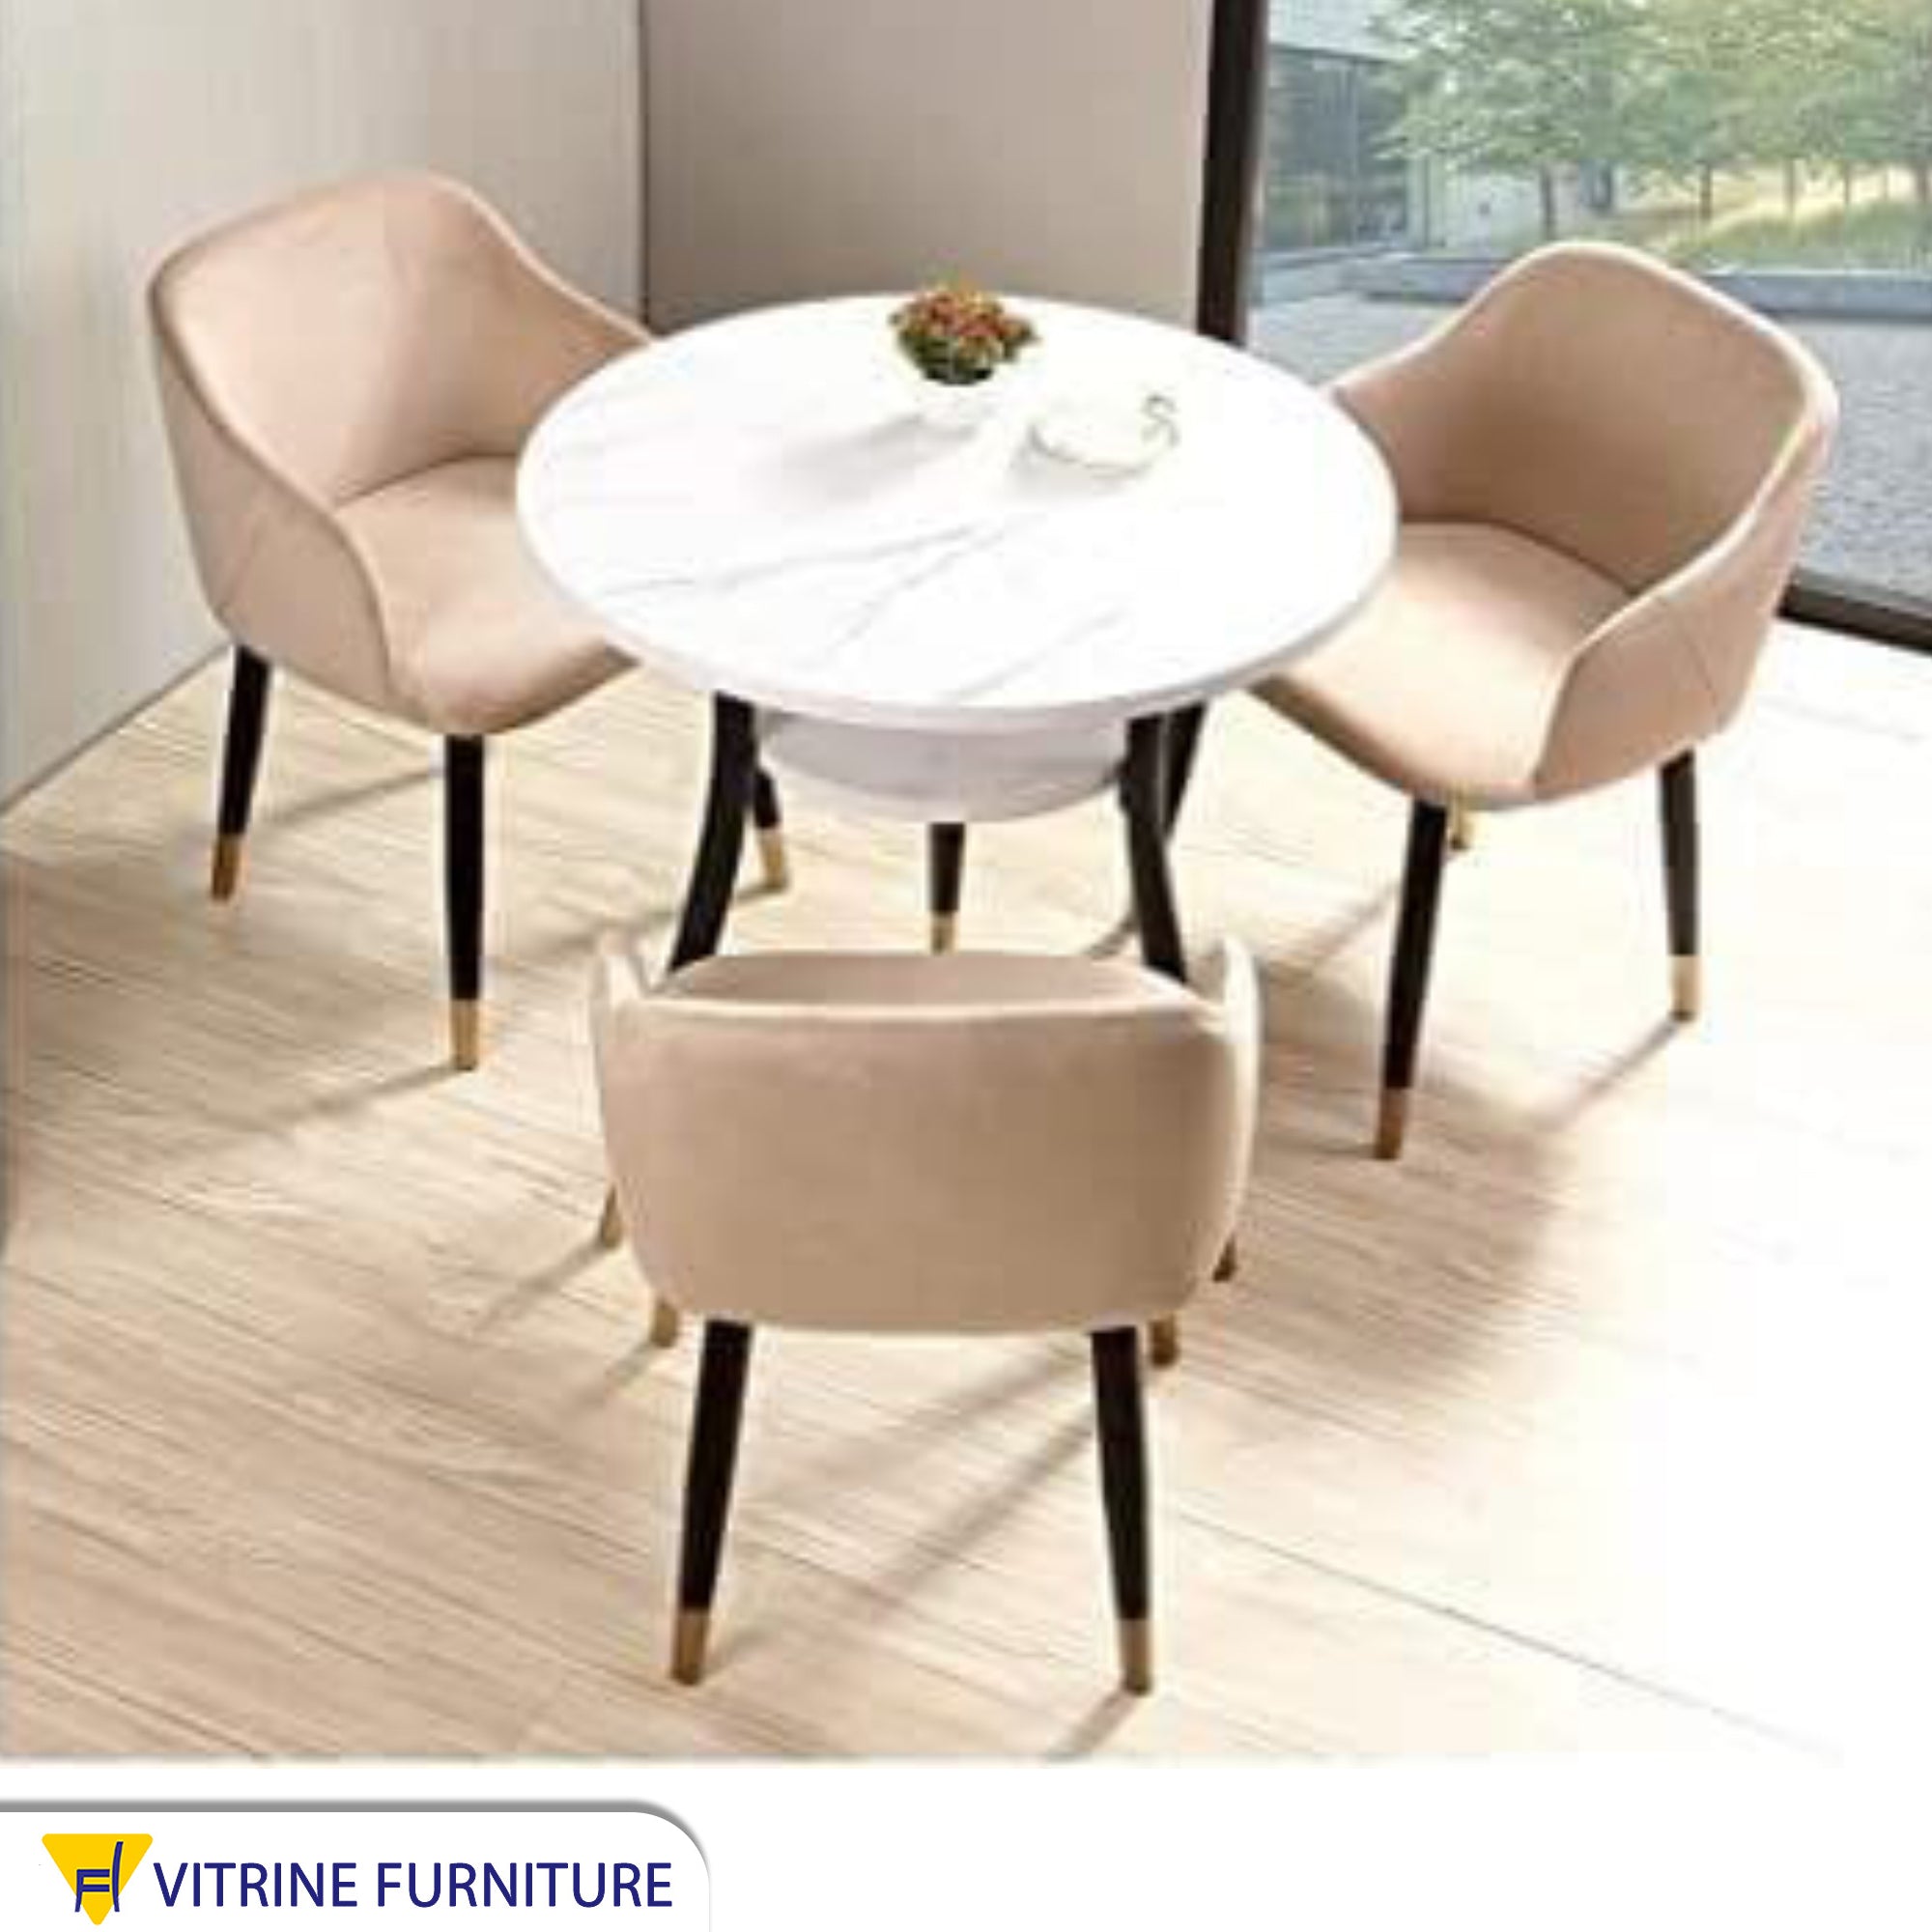 Circular dining table with three chairs